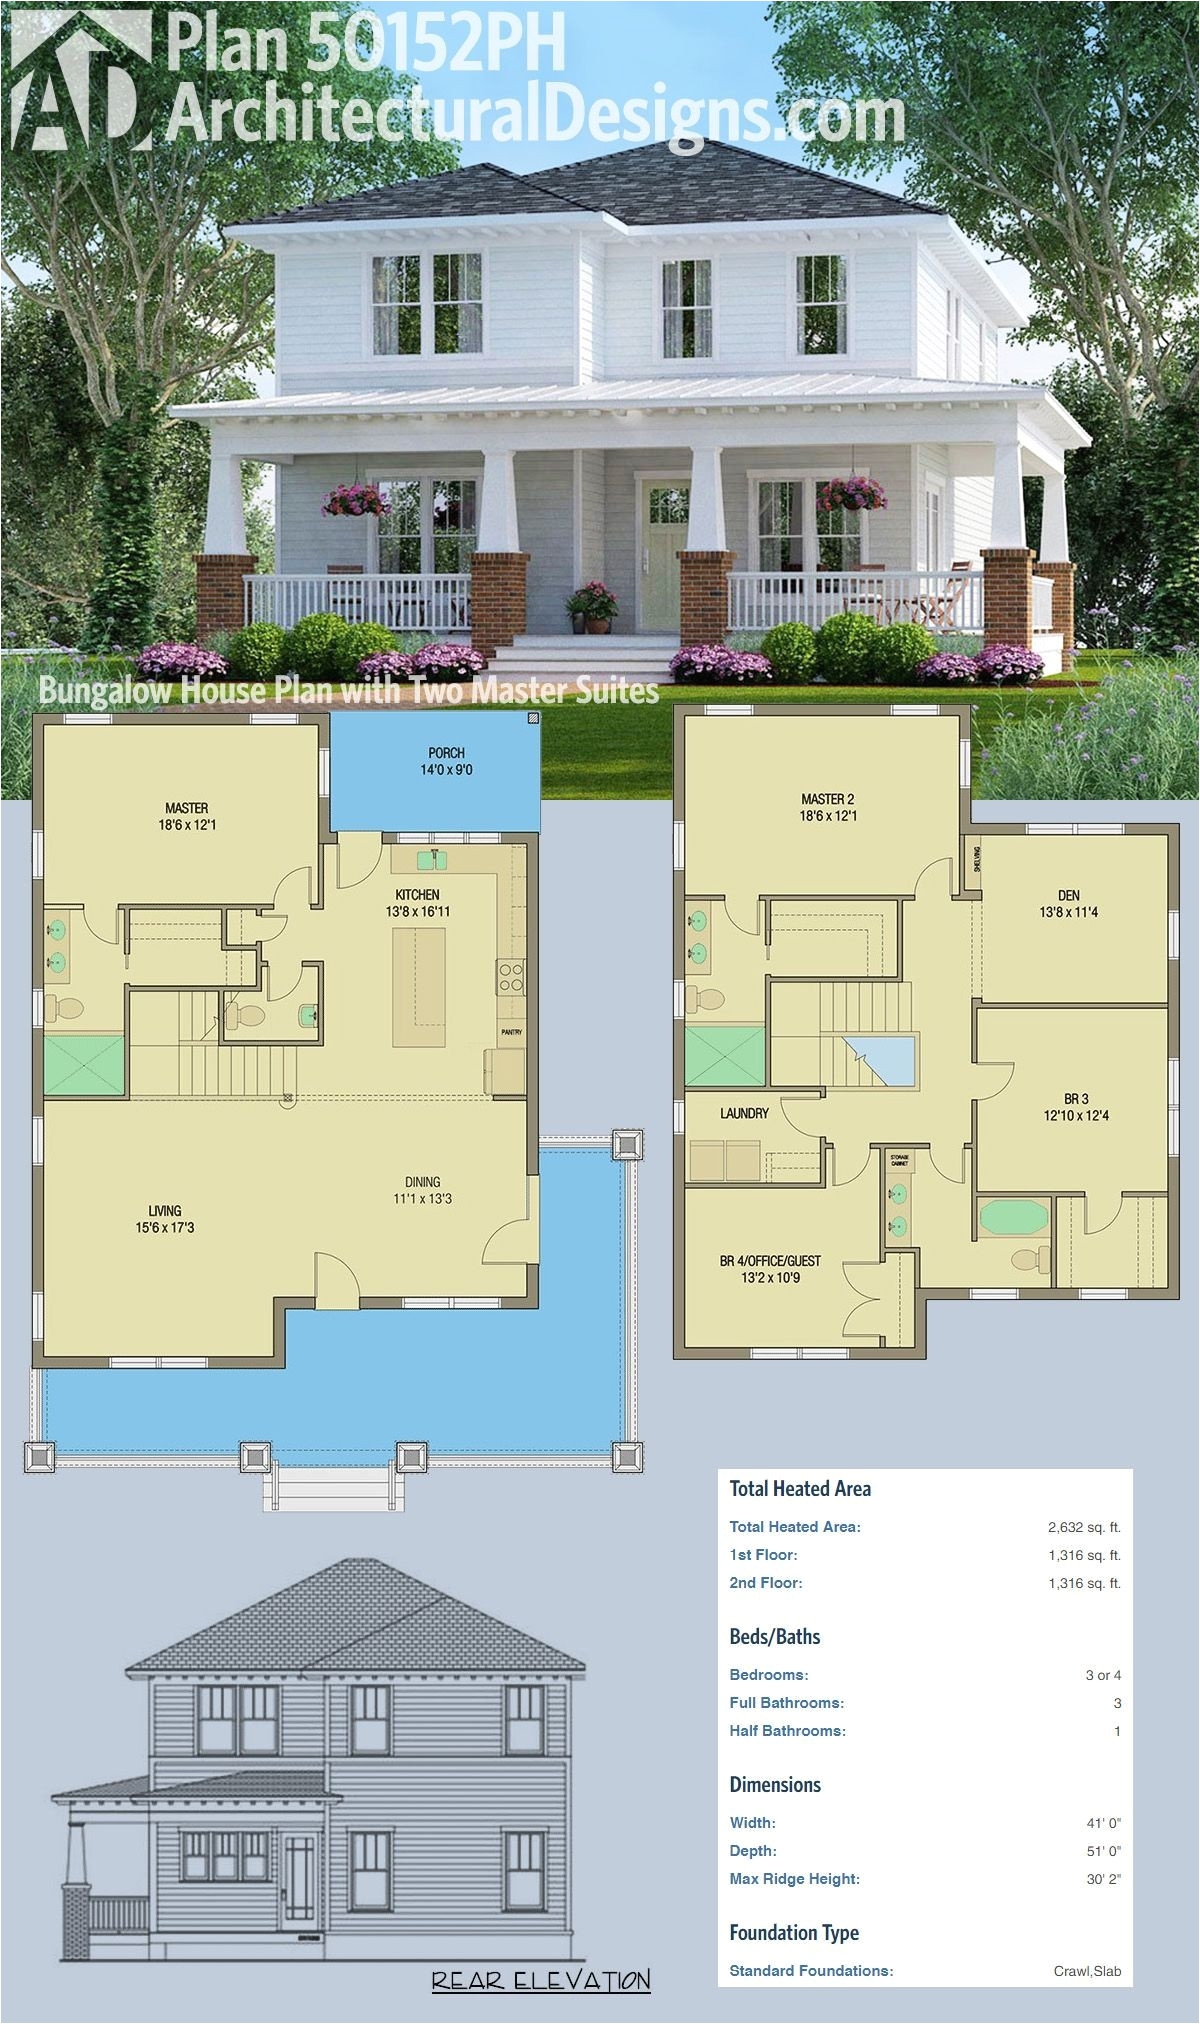 1 story house plans with 2 master suites awesome home design two master bedrooms awesome exceptional